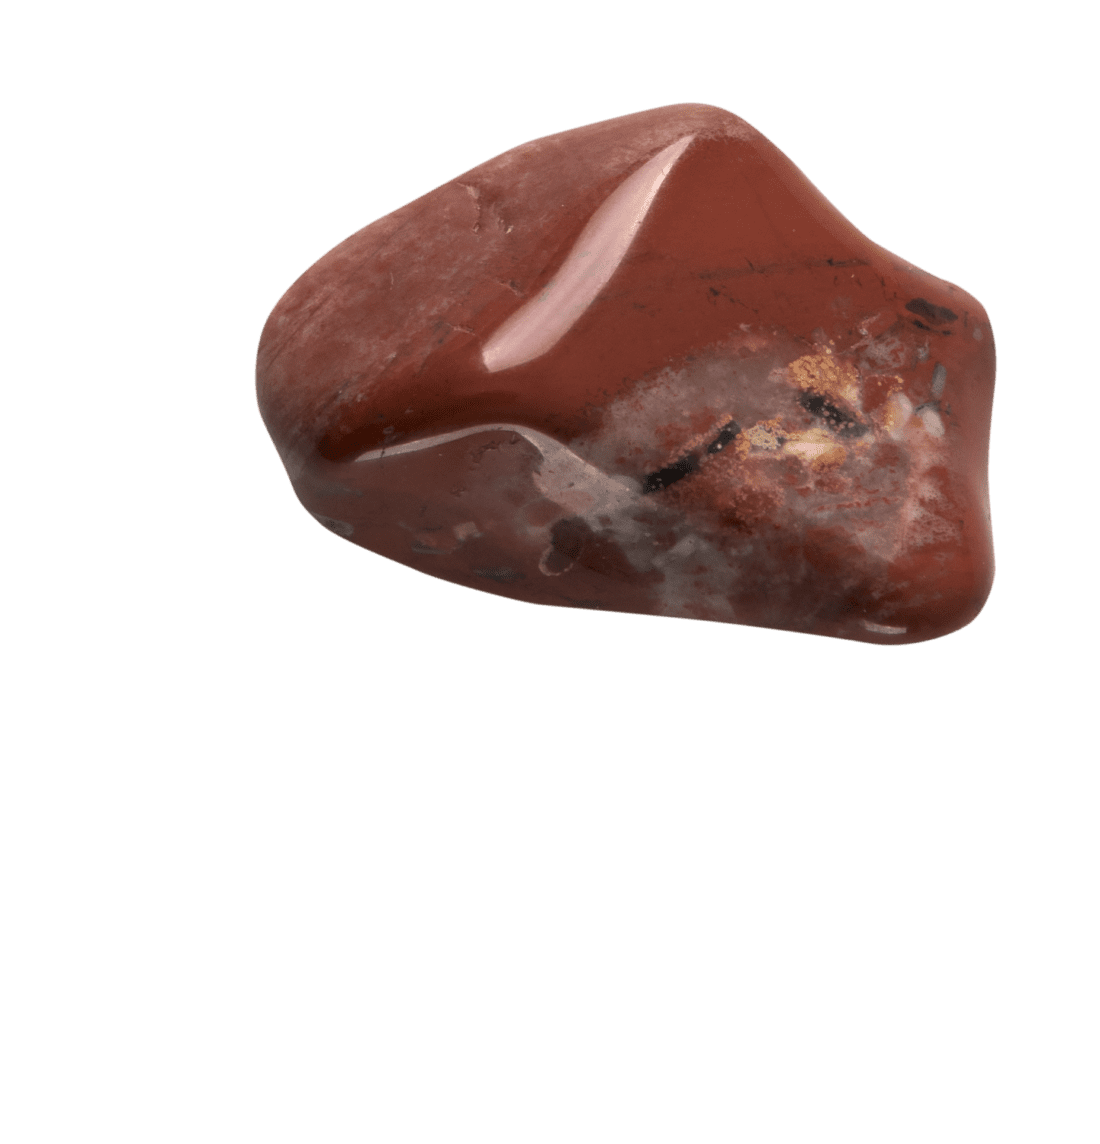 1 red jasper polished stone. Crystals and stones for productivity.